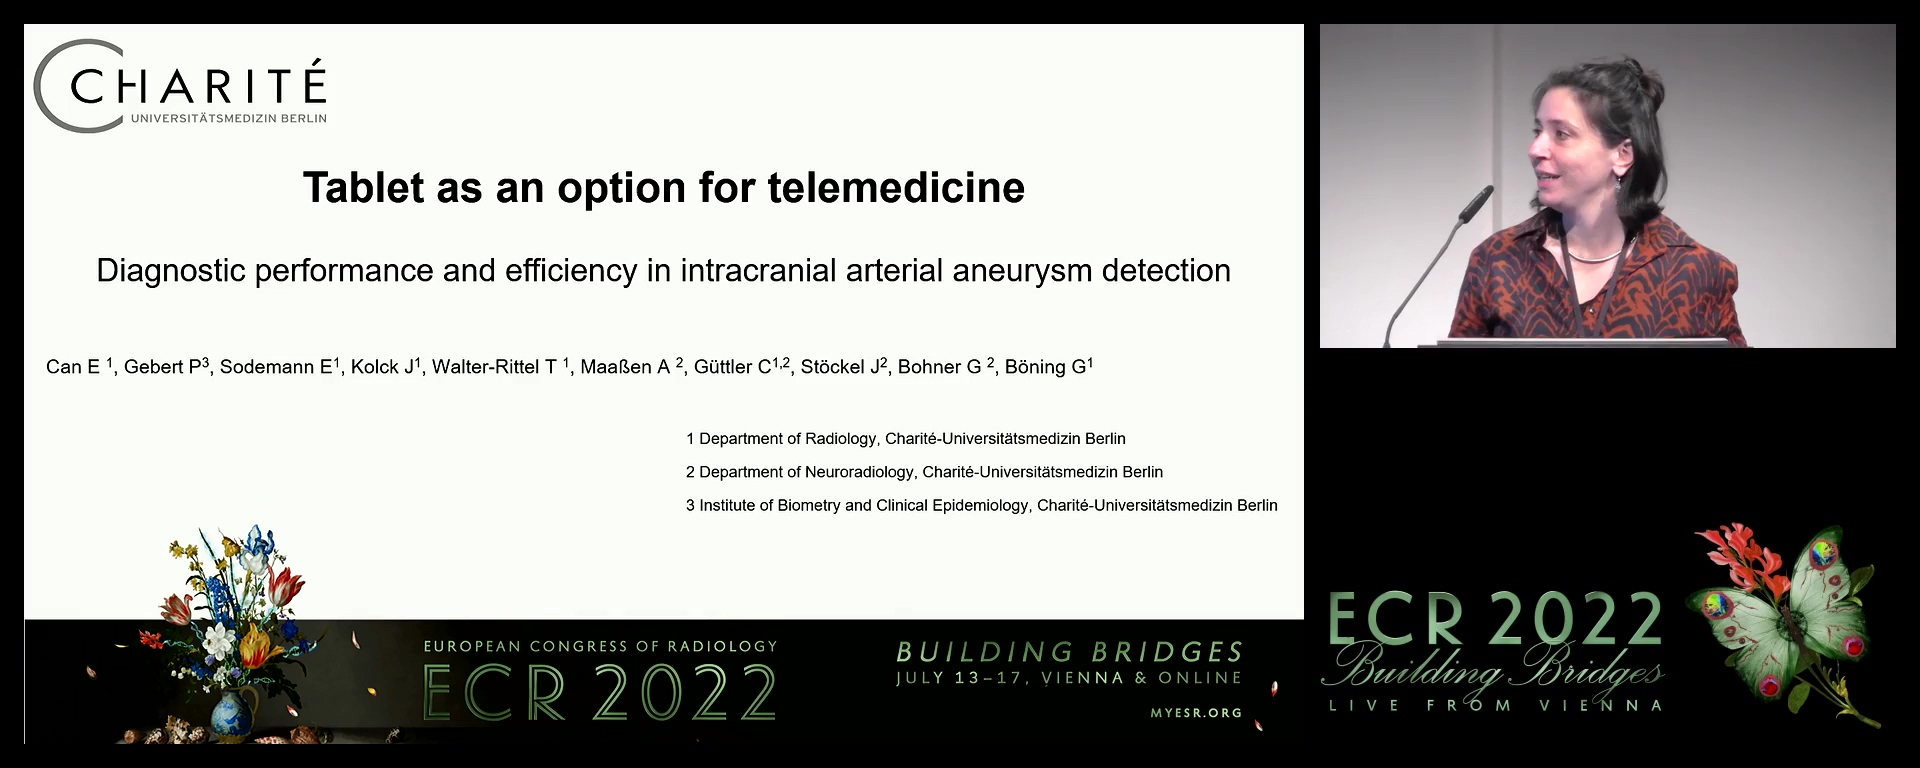 Mobile commercial consumer-grade device as an option for telemedicine - evaluation of diagnostic performance and efficiency in intracranial arterial aneurysm detection - Elif Can, Berlin / DE